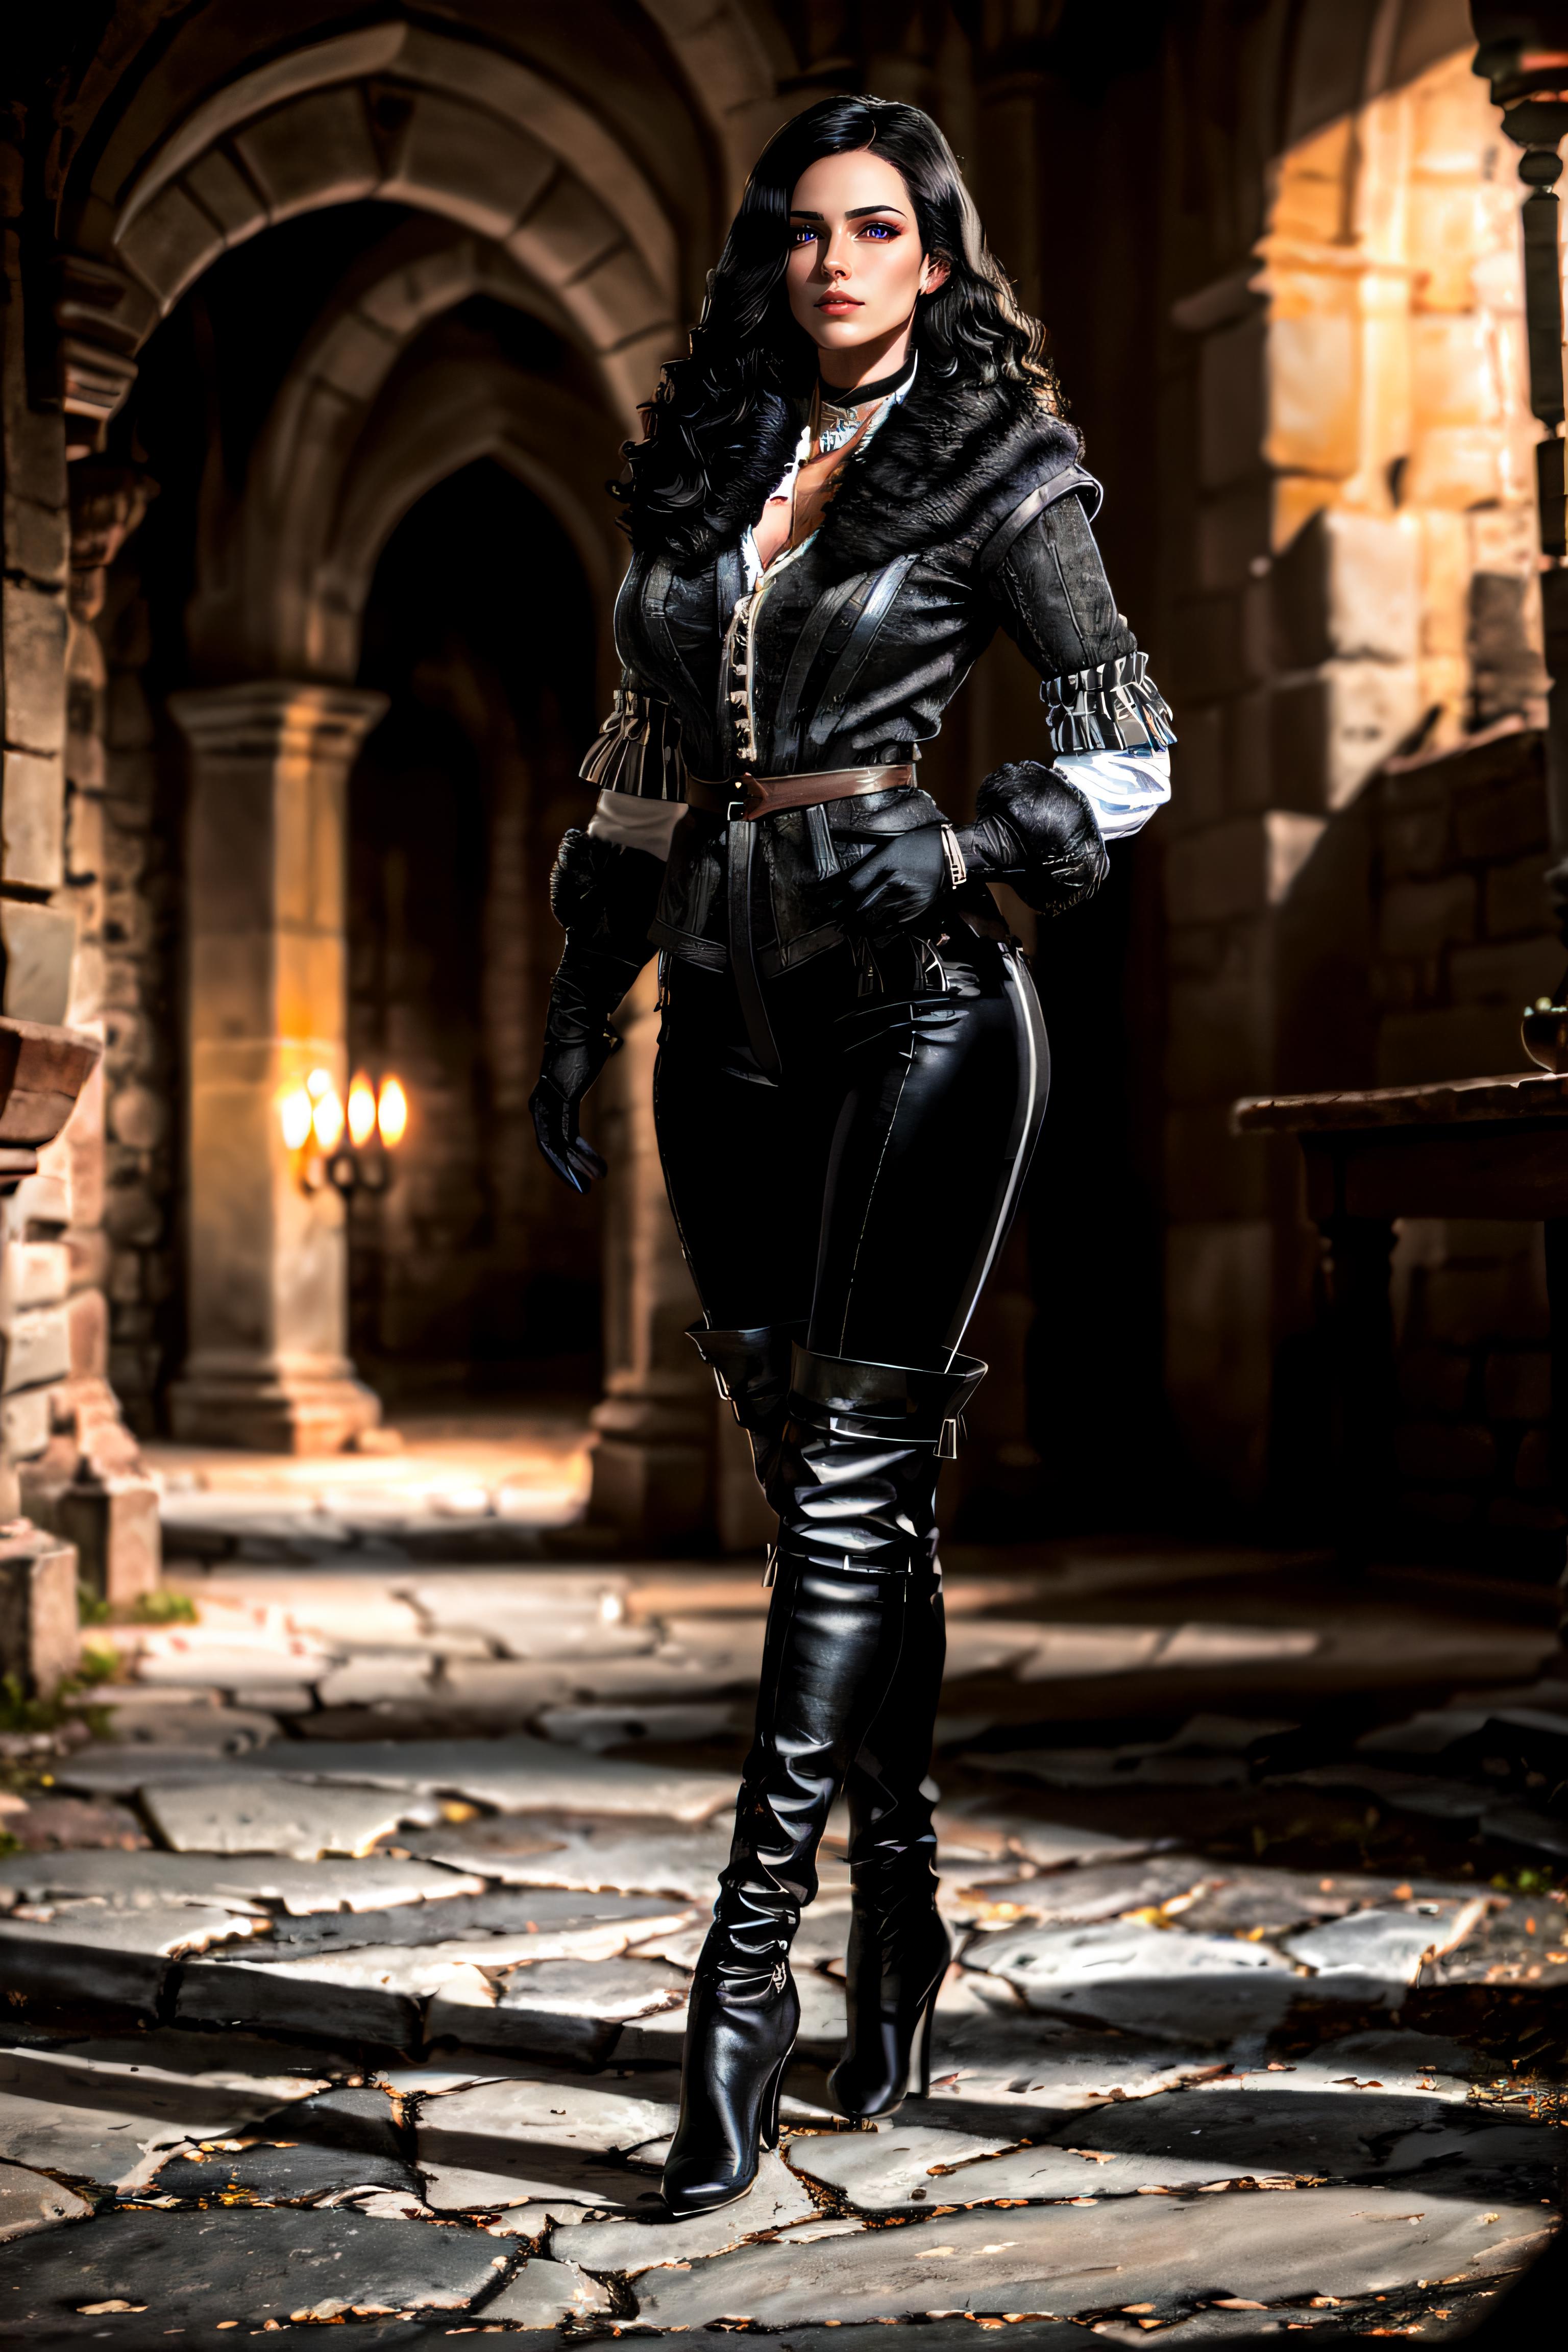 Yennefer | The Witcher 3 : Wild Hunt  image by betweenspectrums